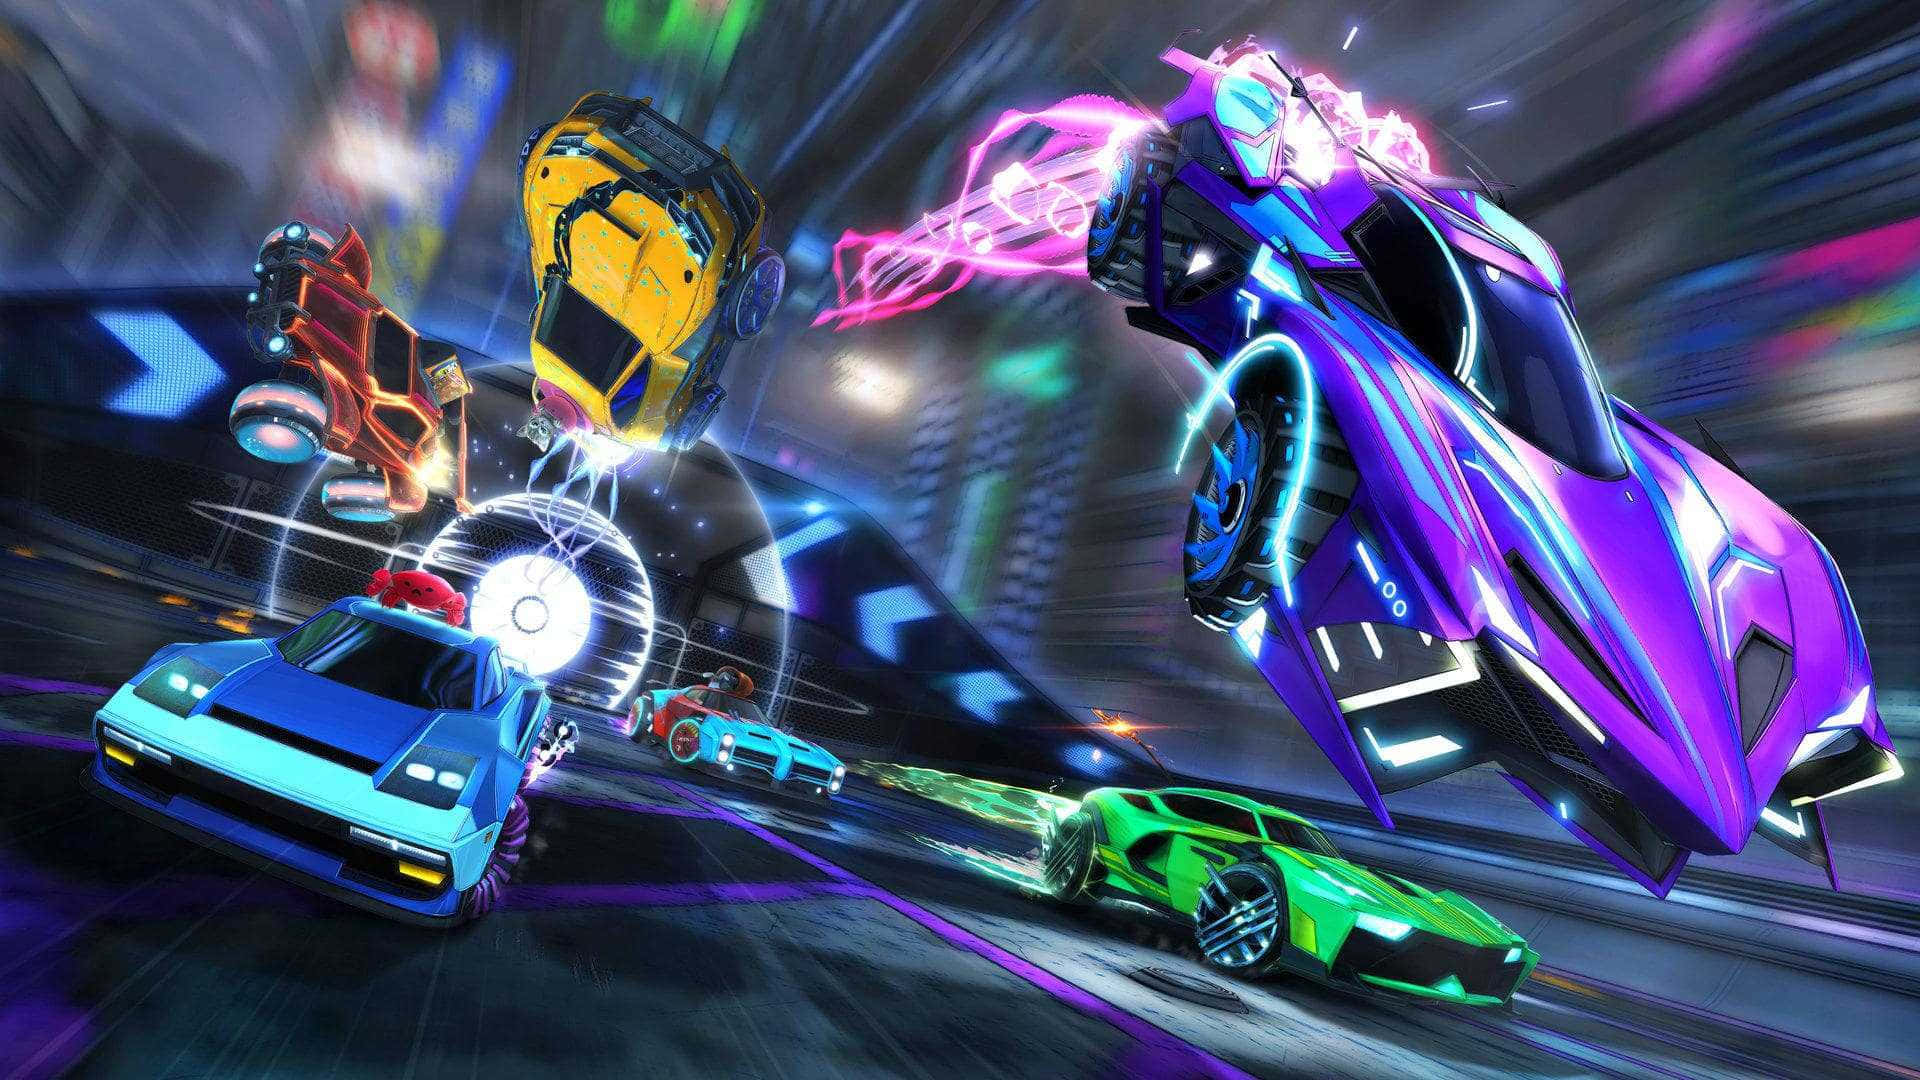 Enjoy the thrills of Rocket League with new 1080p visuals